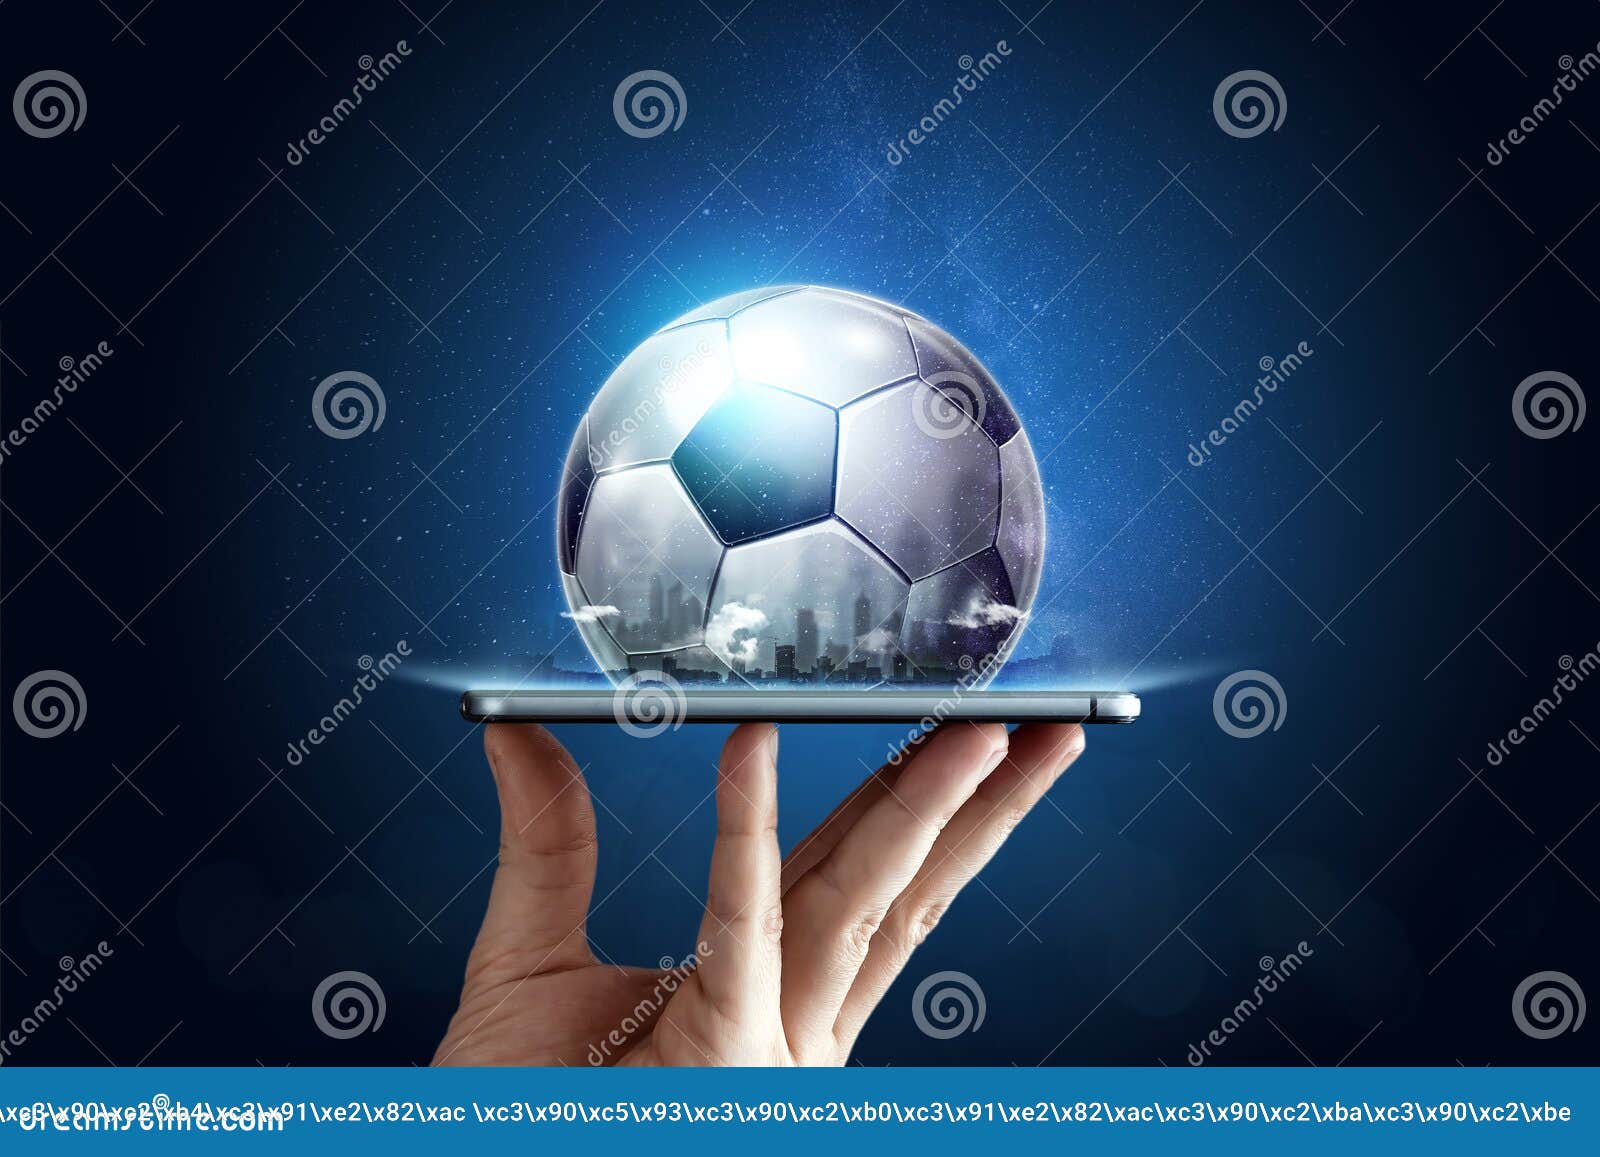 smartphone in hand with a 3d soccer ball on a blue background. bets, sports betting, bookmaker. mixed media